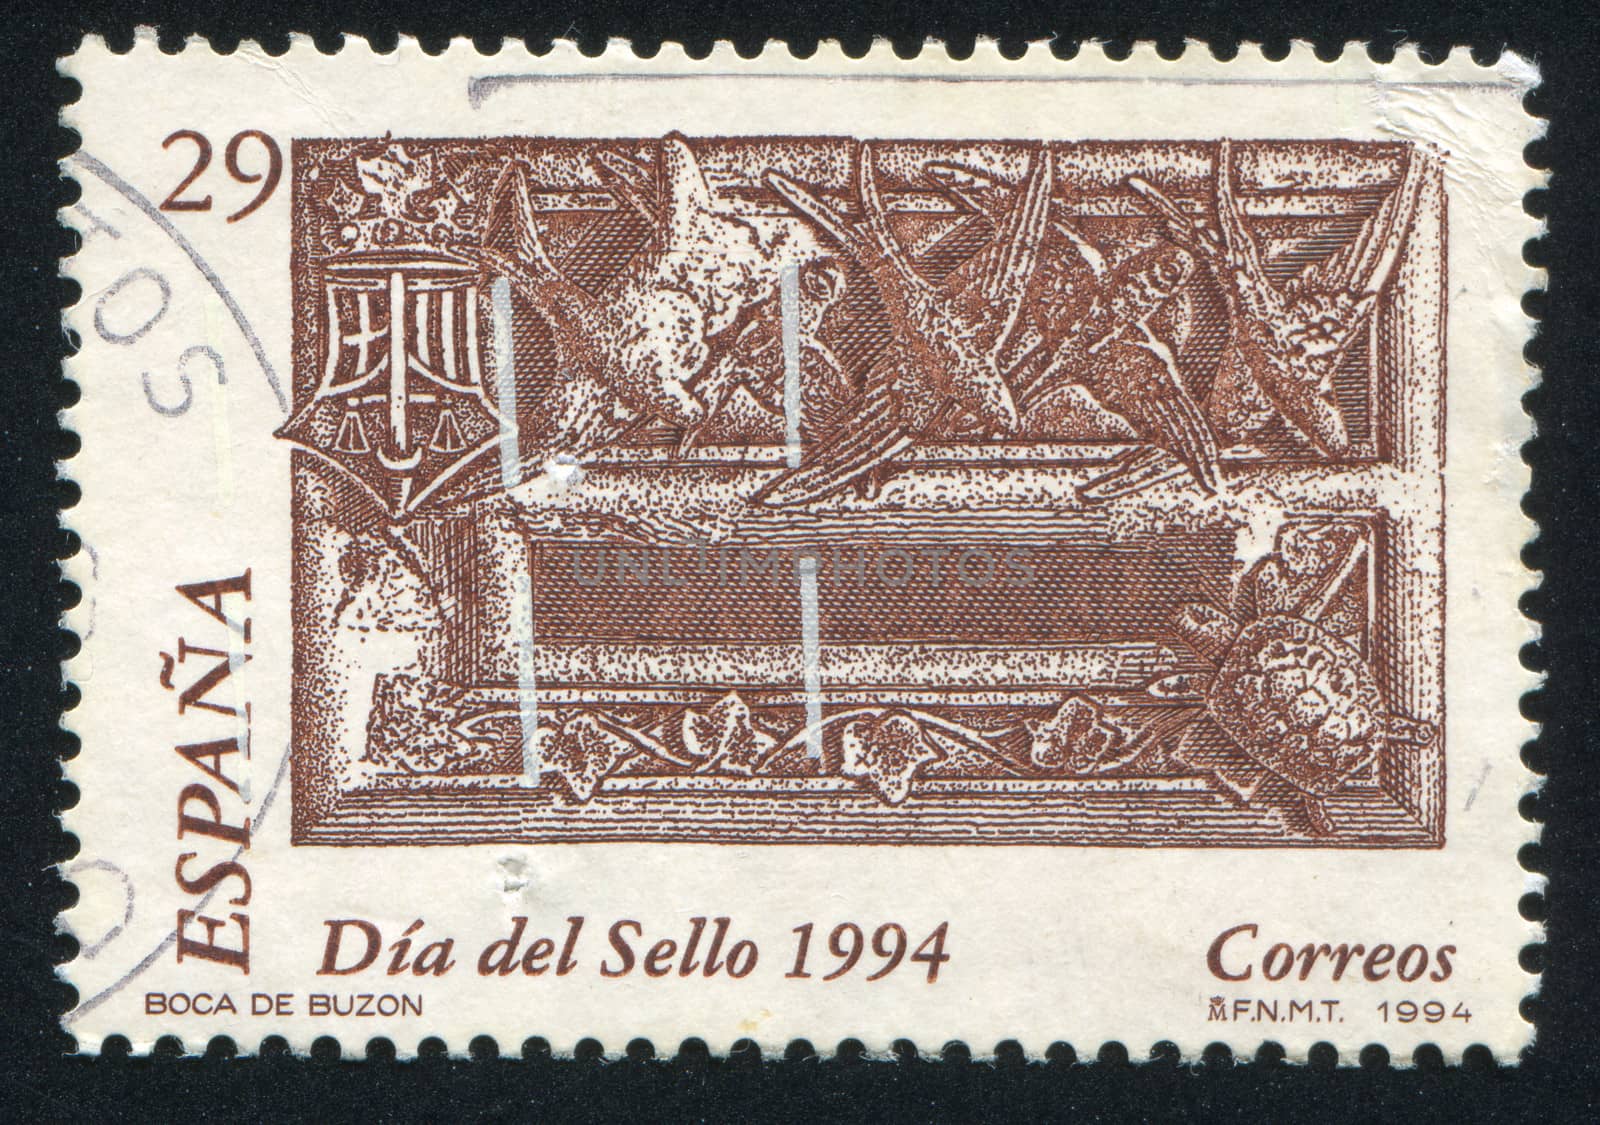 SPAIN - CIRCA 1994: stamp printed by Spain, shows Site of the Mailbox, circa 1994